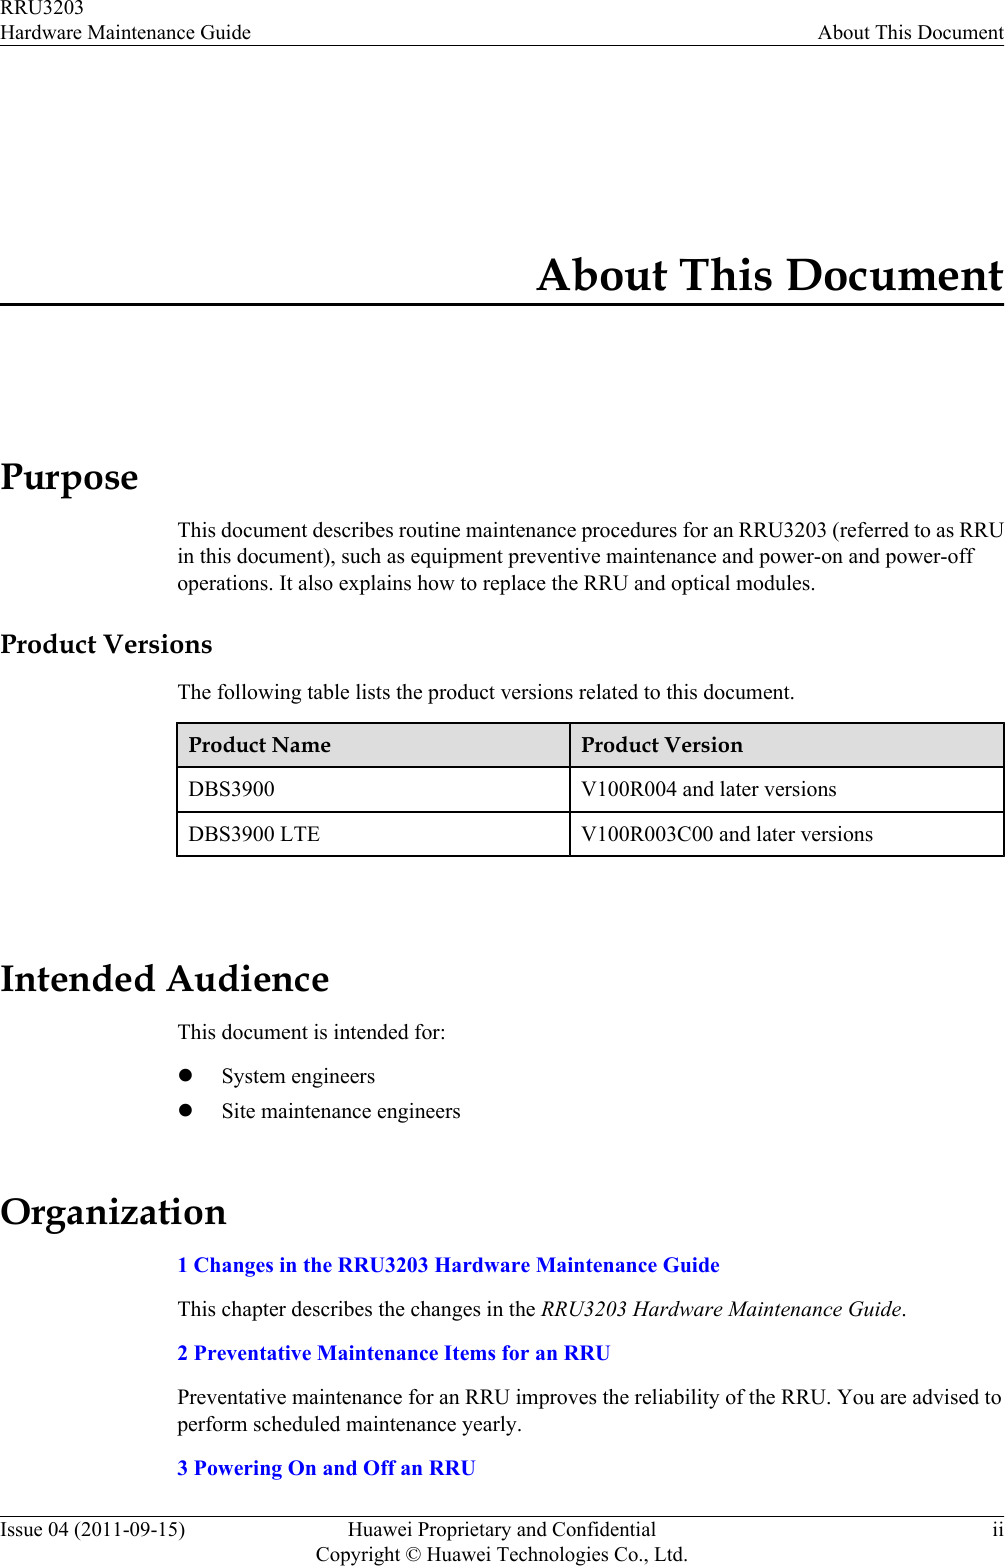 About This DocumentPurposeThis document describes routine maintenance procedures for an RRU3203 (referred to as RRUin this document), such as equipment preventive maintenance and power-on and power-offoperations. It also explains how to replace the RRU and optical modules.Product VersionsThe following table lists the product versions related to this document.Product Name Product VersionDBS3900 V100R004 and later versionsDBS3900 LTE V100R003C00 and later versions Intended AudienceThis document is intended for:lSystem engineerslSite maintenance engineersOrganization1 Changes in the RRU3203 Hardware Maintenance GuideThis chapter describes the changes in the RRU3203 Hardware Maintenance Guide.2 Preventative Maintenance Items for an RRUPreventative maintenance for an RRU improves the reliability of the RRU. You are advised toperform scheduled maintenance yearly.3 Powering On and Off an RRURRU3203Hardware Maintenance Guide About This DocumentIssue 04 (2011-09-15) Huawei Proprietary and ConfidentialCopyright © Huawei Technologies Co., Ltd.ii